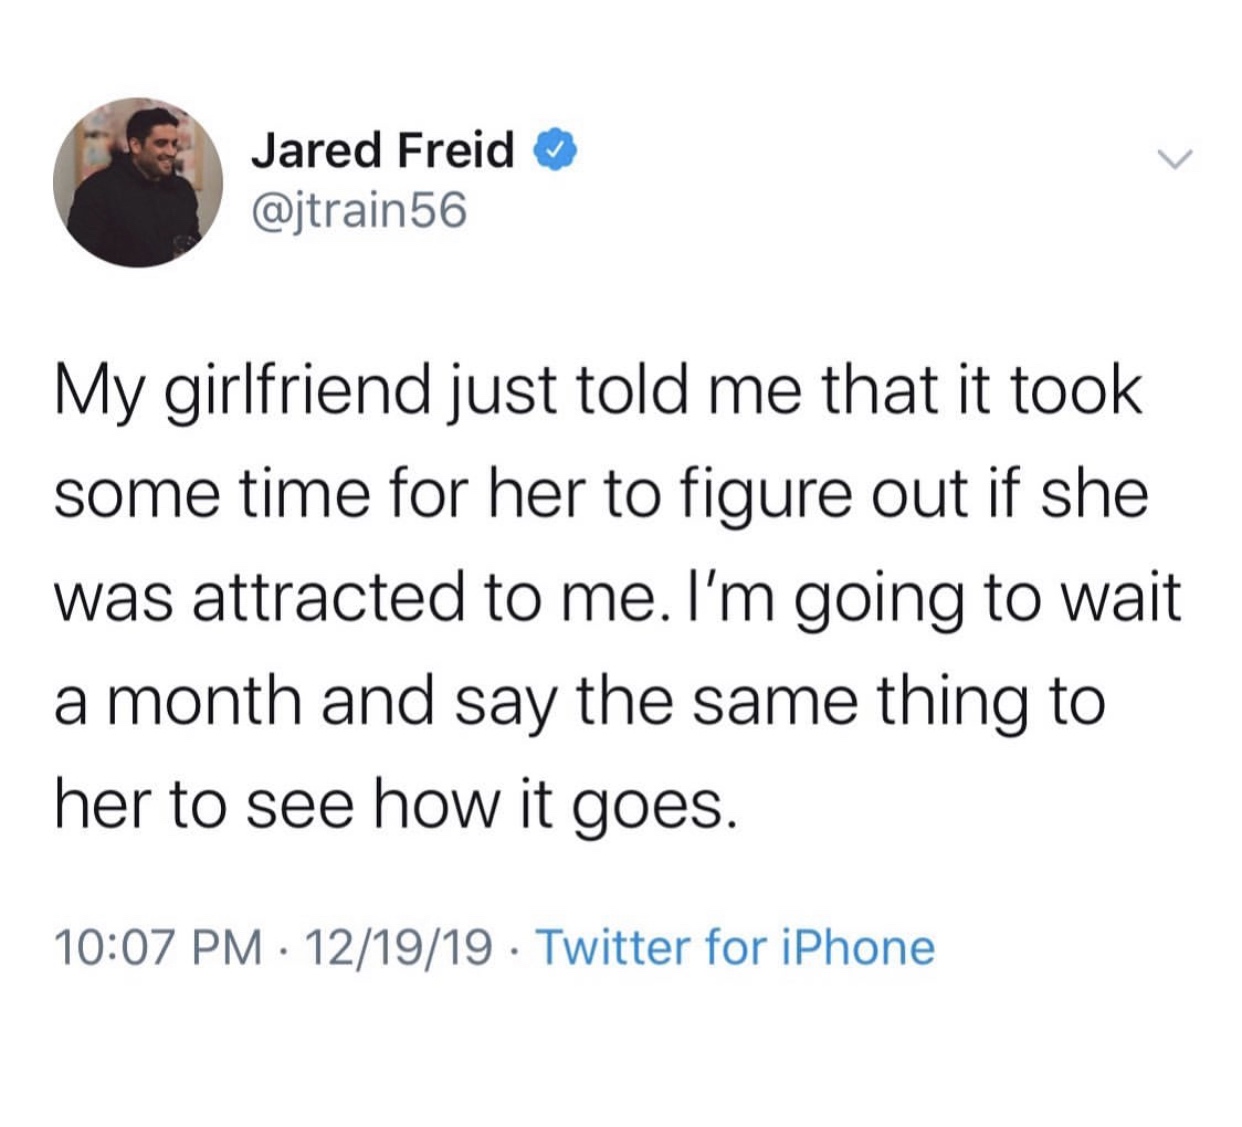 hate asking for favors - Jared Freid My girlfriend just told me that it took some time for her to figure out if she was attracted to me. I'm going to wait a month and say the same thing to her to see how it goes. 121919 Twitter for iPhone